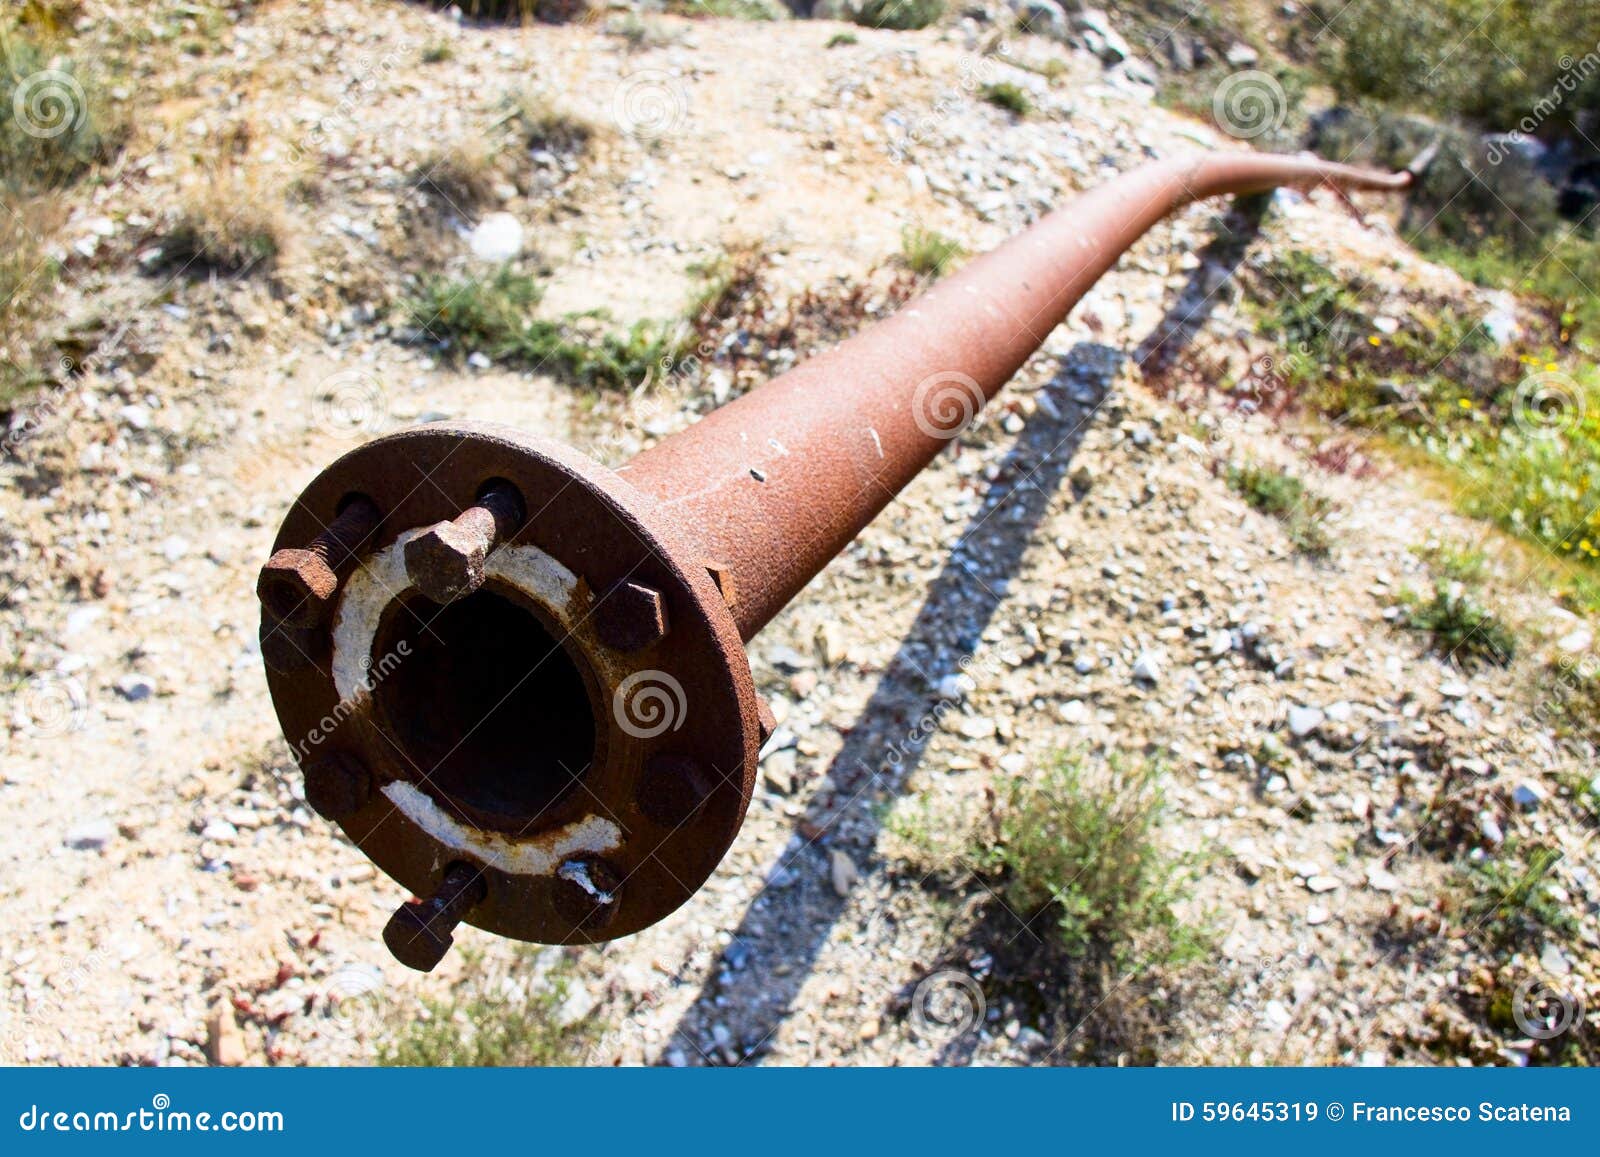 old-rusty-pipeline-concept-image-59645319.jpg